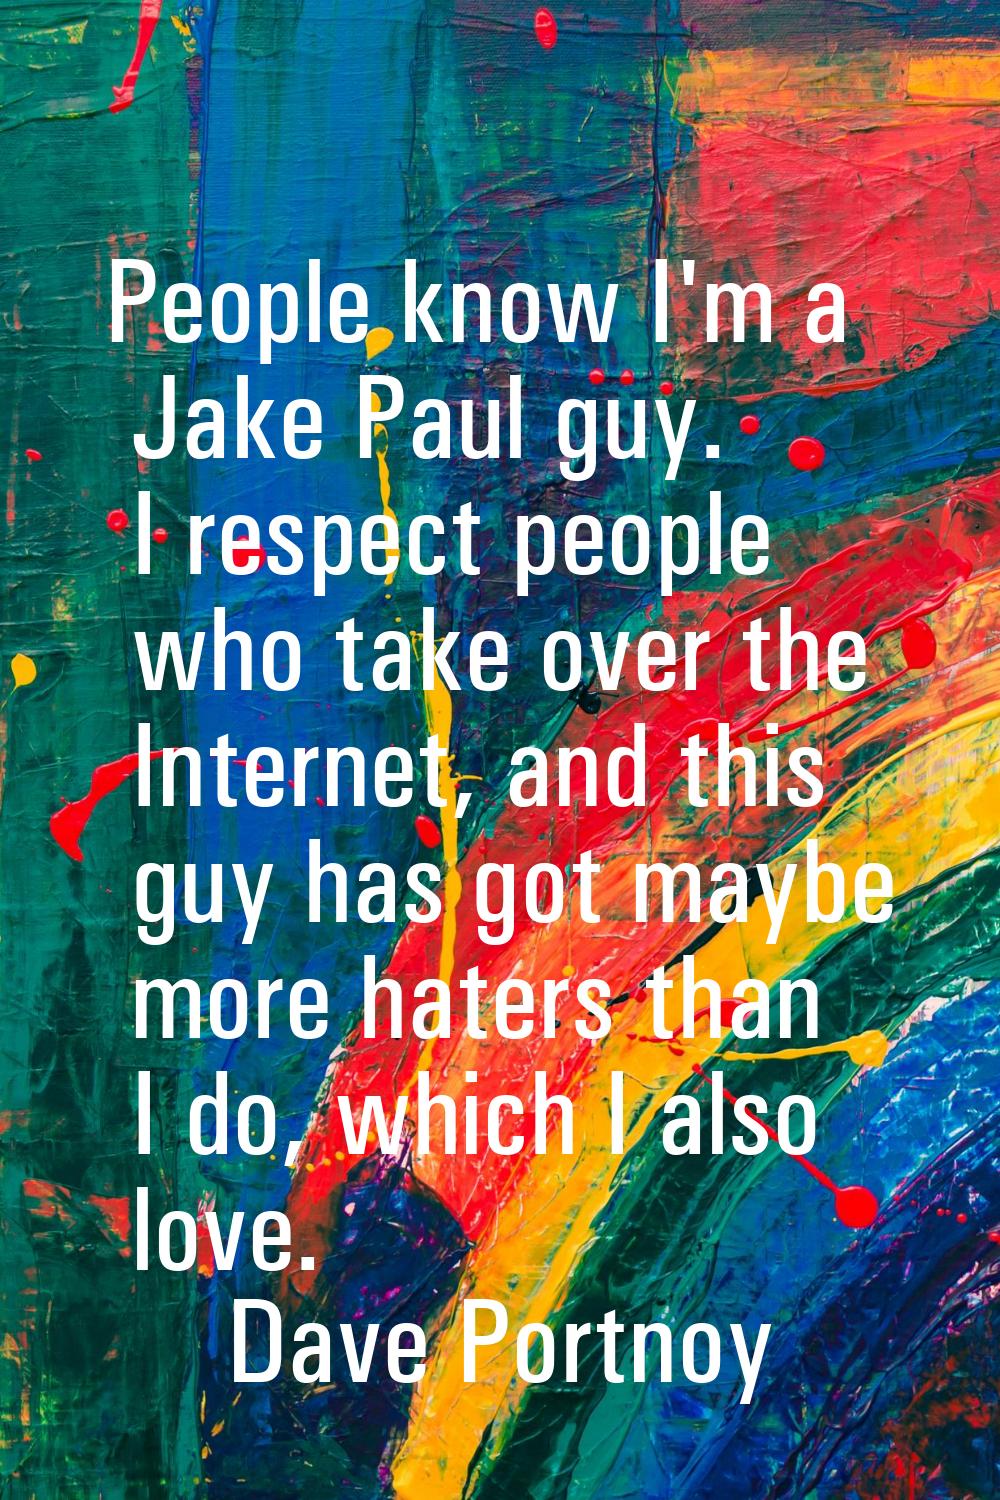 People know I'm a Jake Paul guy. I respect people who take over the Internet, and this guy has got 